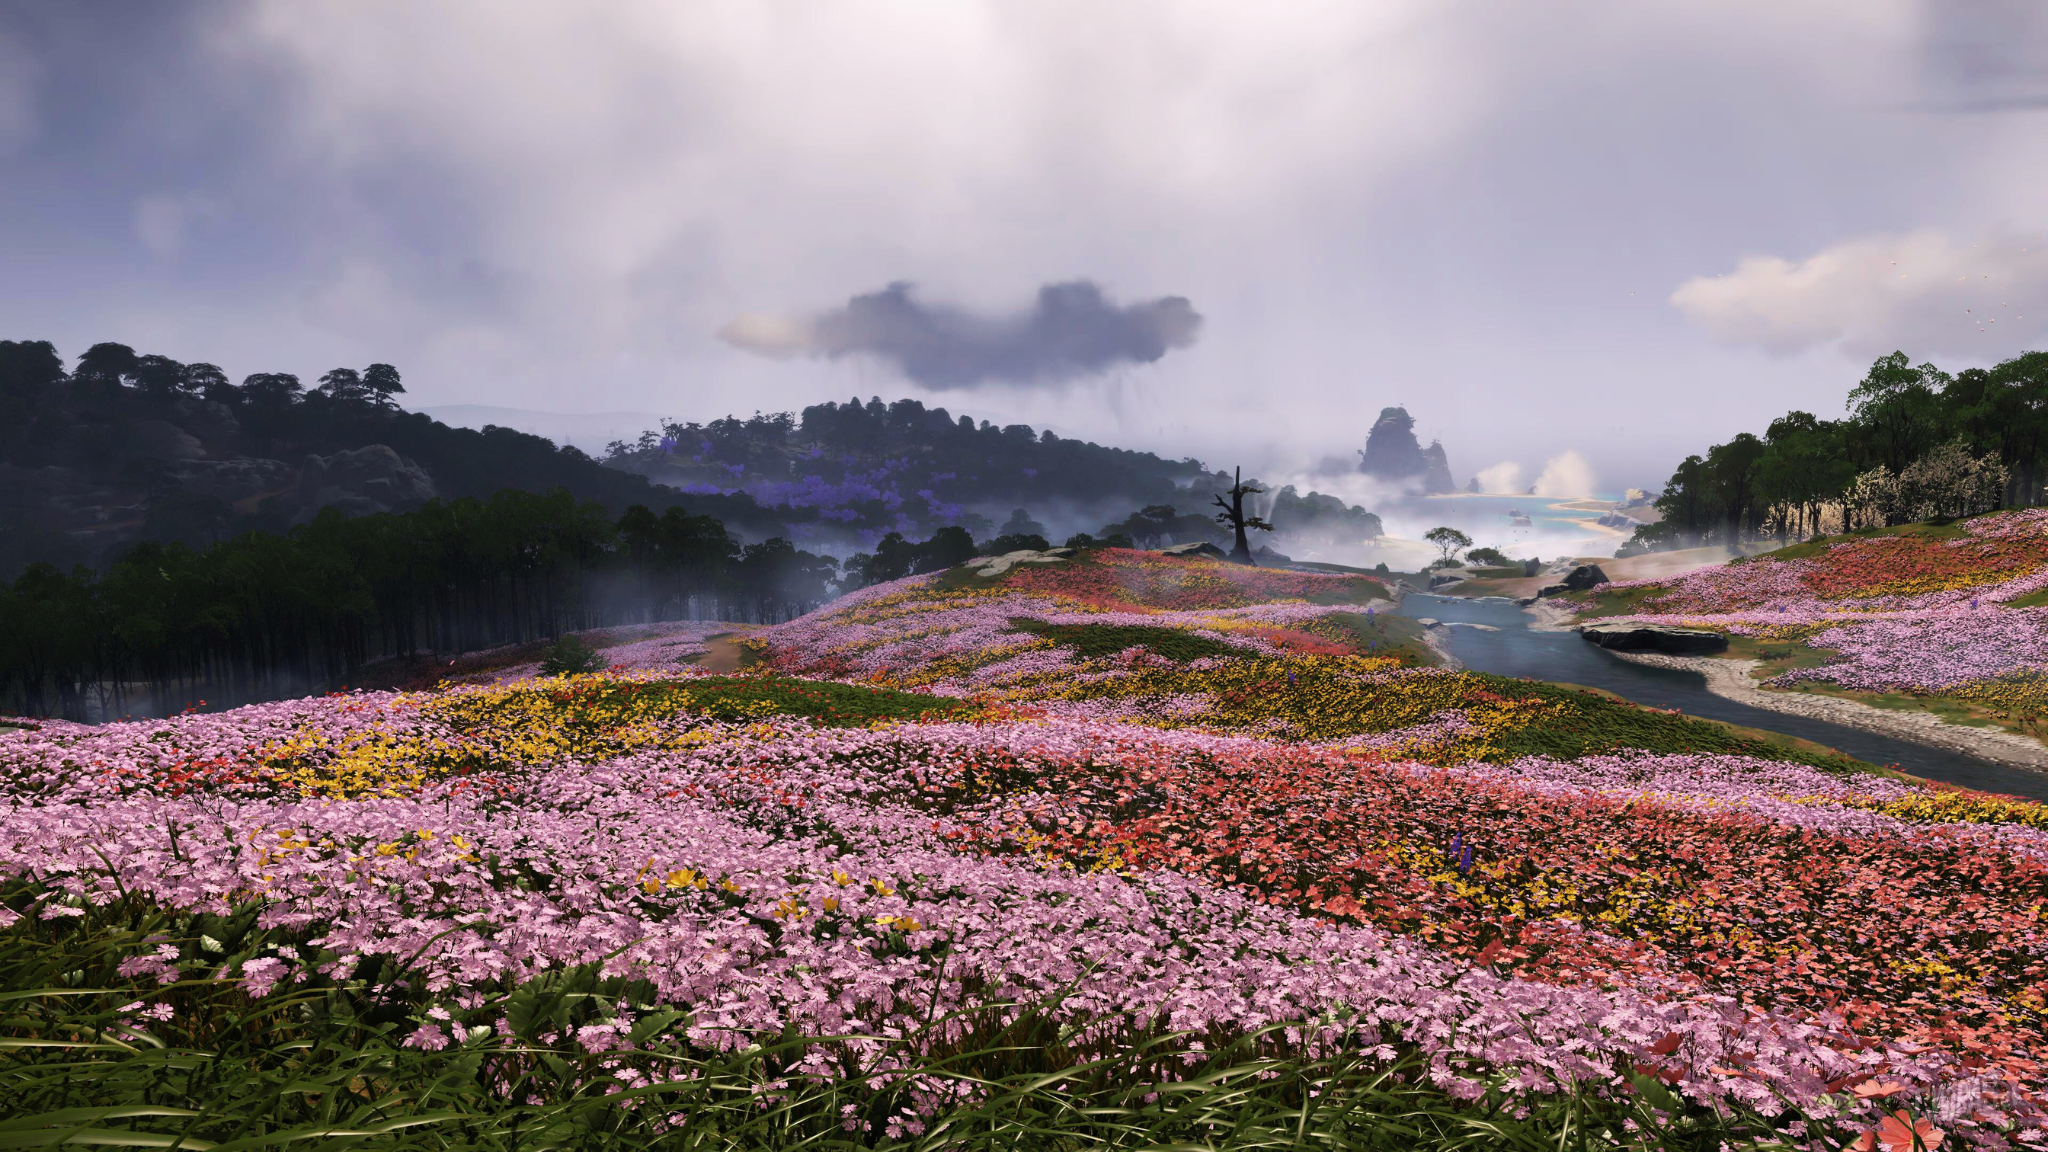 General 2048x1152 cwirasek screen shot Ultra graphics PlayStation Playstation 5 Sony Ghost of Tsushima  landscape field 4K video game art video games flowers